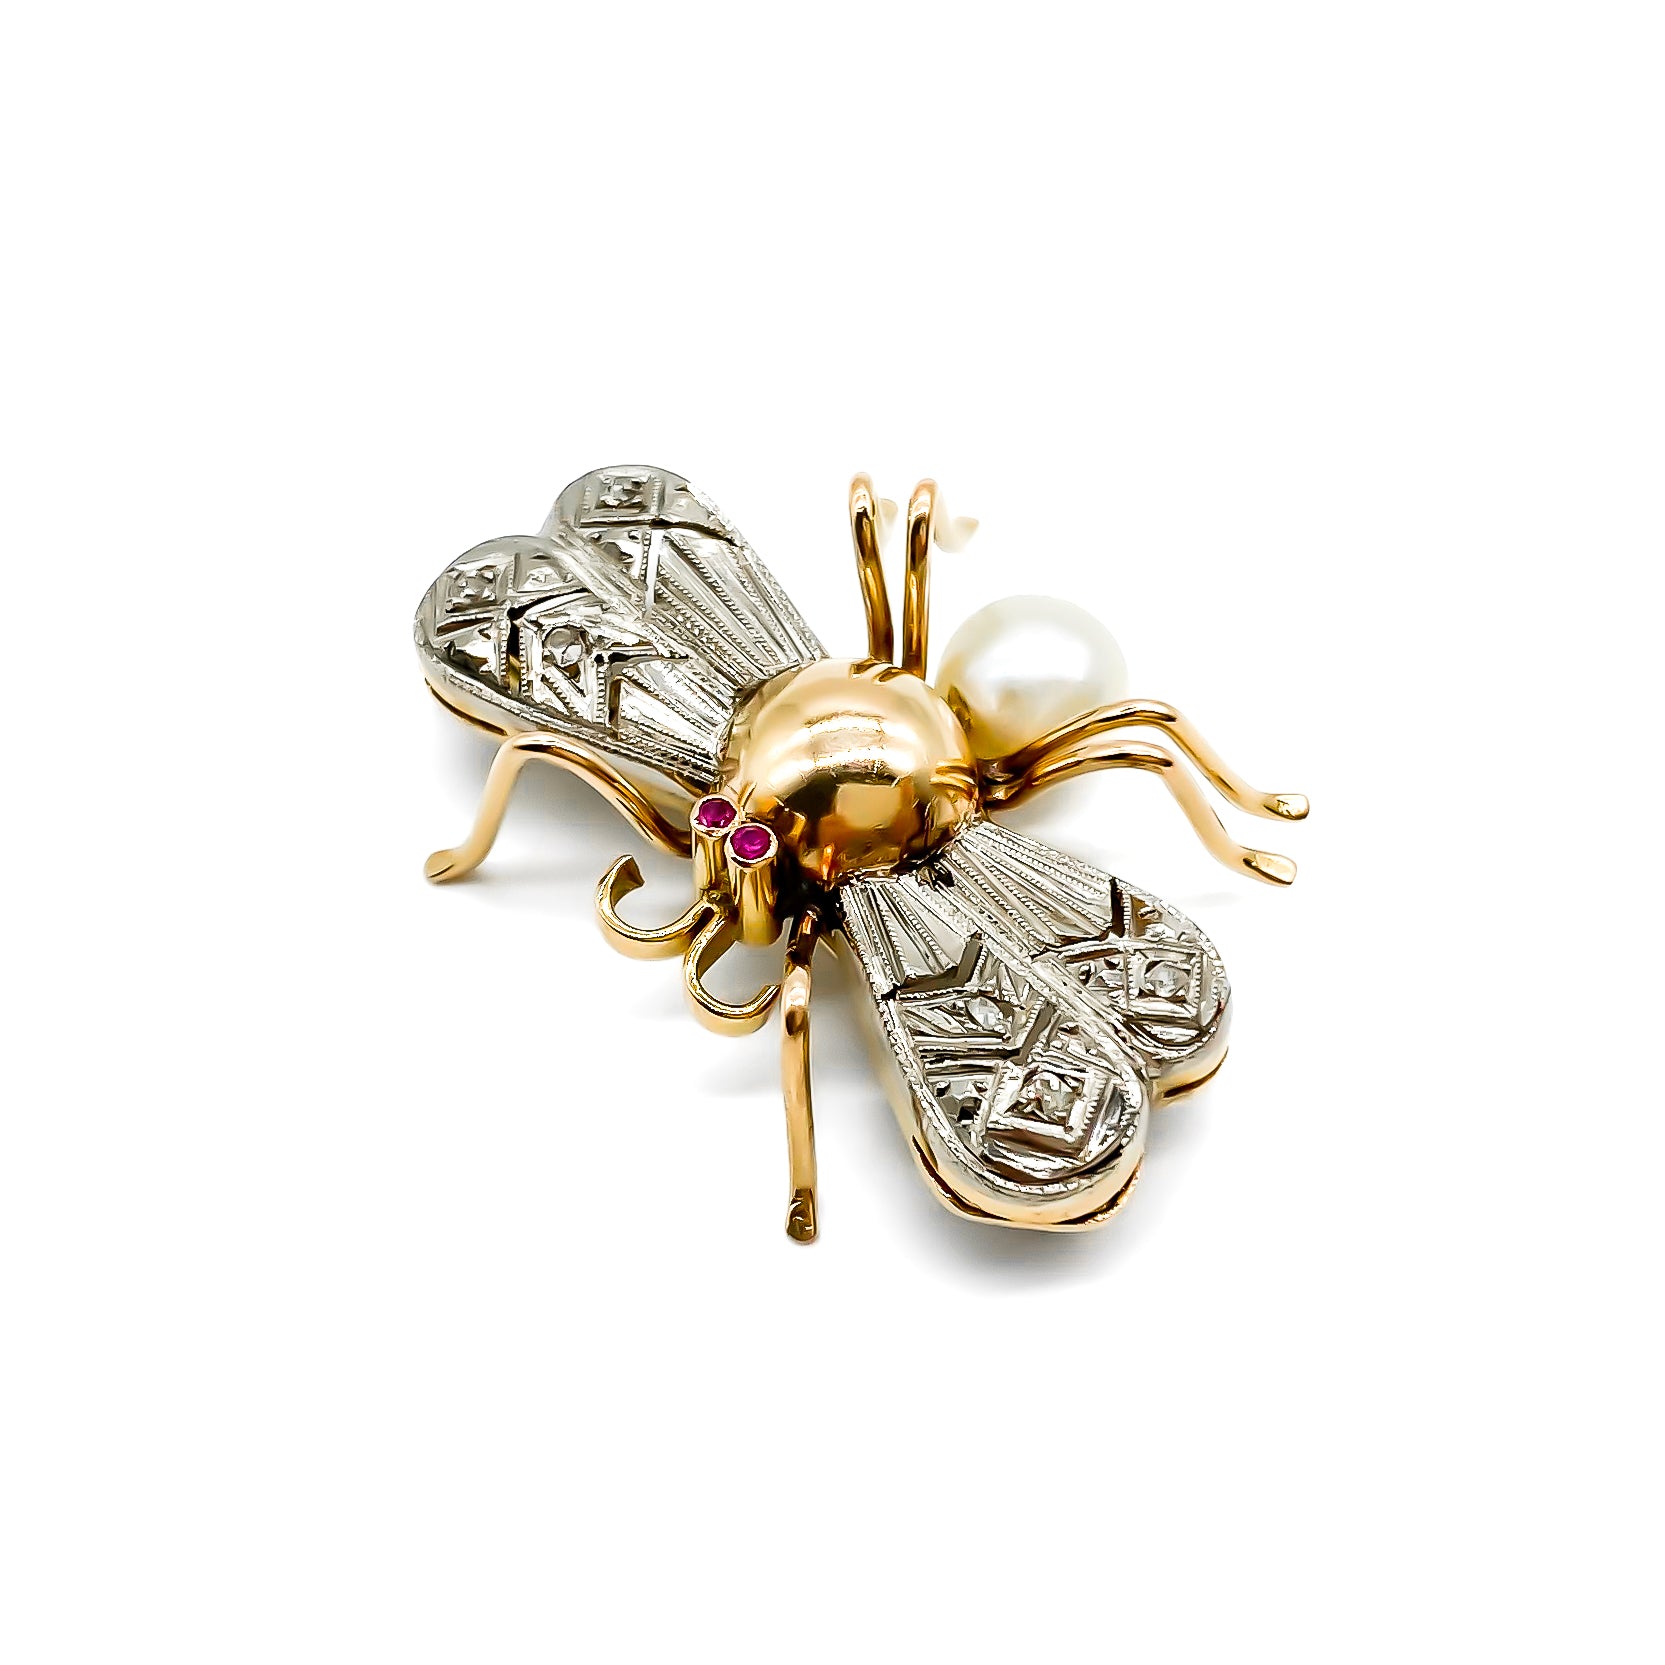 Charming 18ct white and rose gold insect brooch with diamond encrusted wings, ruby eyes and a pearl abdomen.